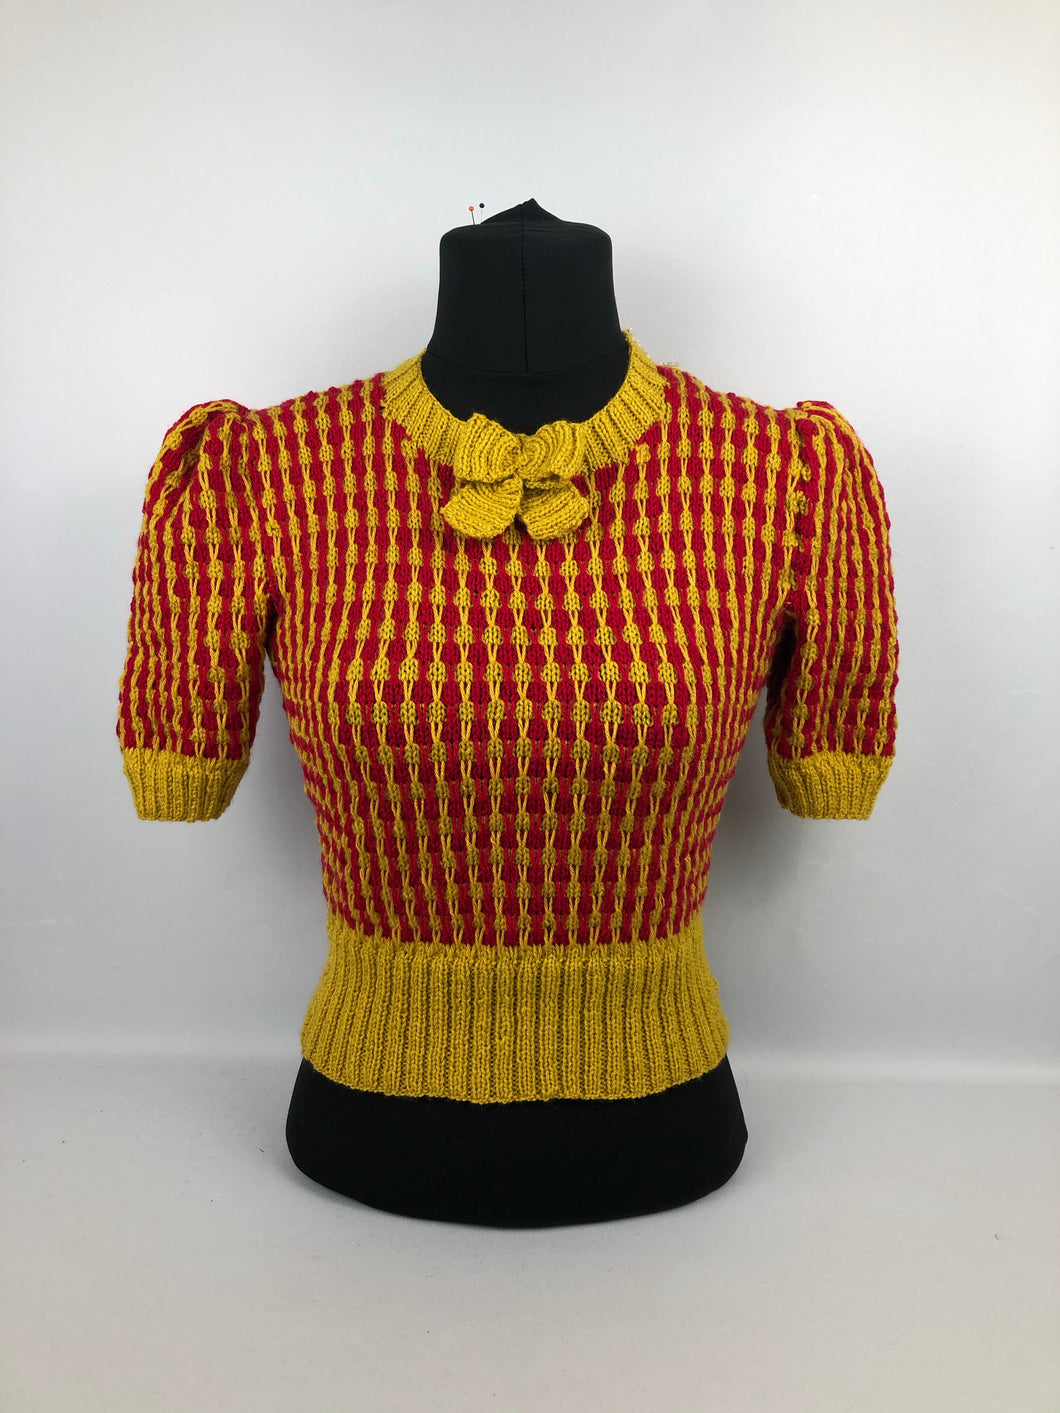 Reproduction 1940s Stripe Jumper Knitted from a Wartime Pattern - B32 33 34